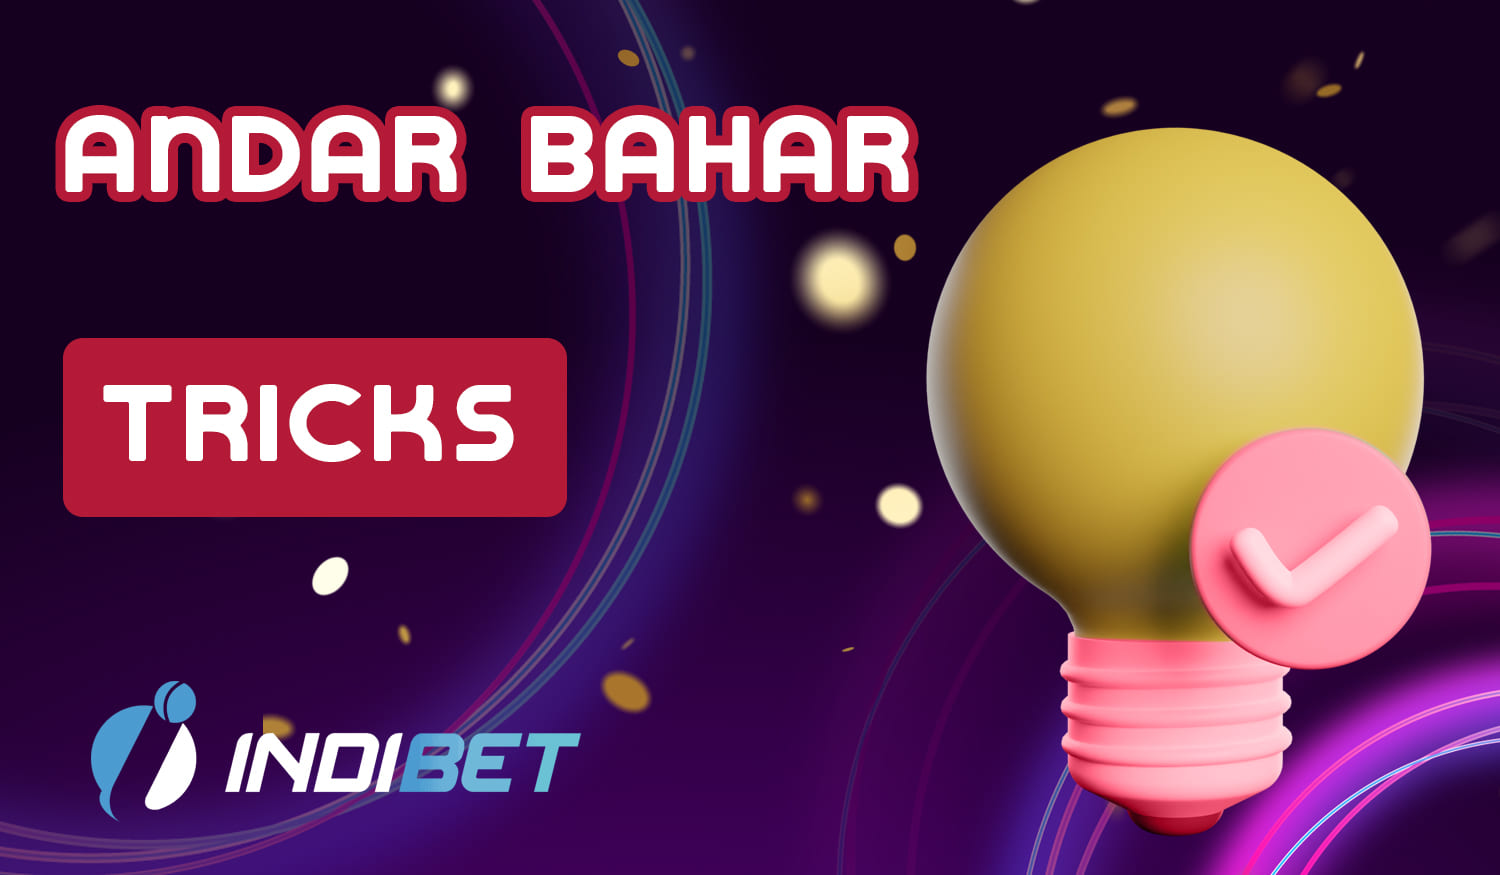 List of useful tips for successful playing Andar Bahar at Indibet